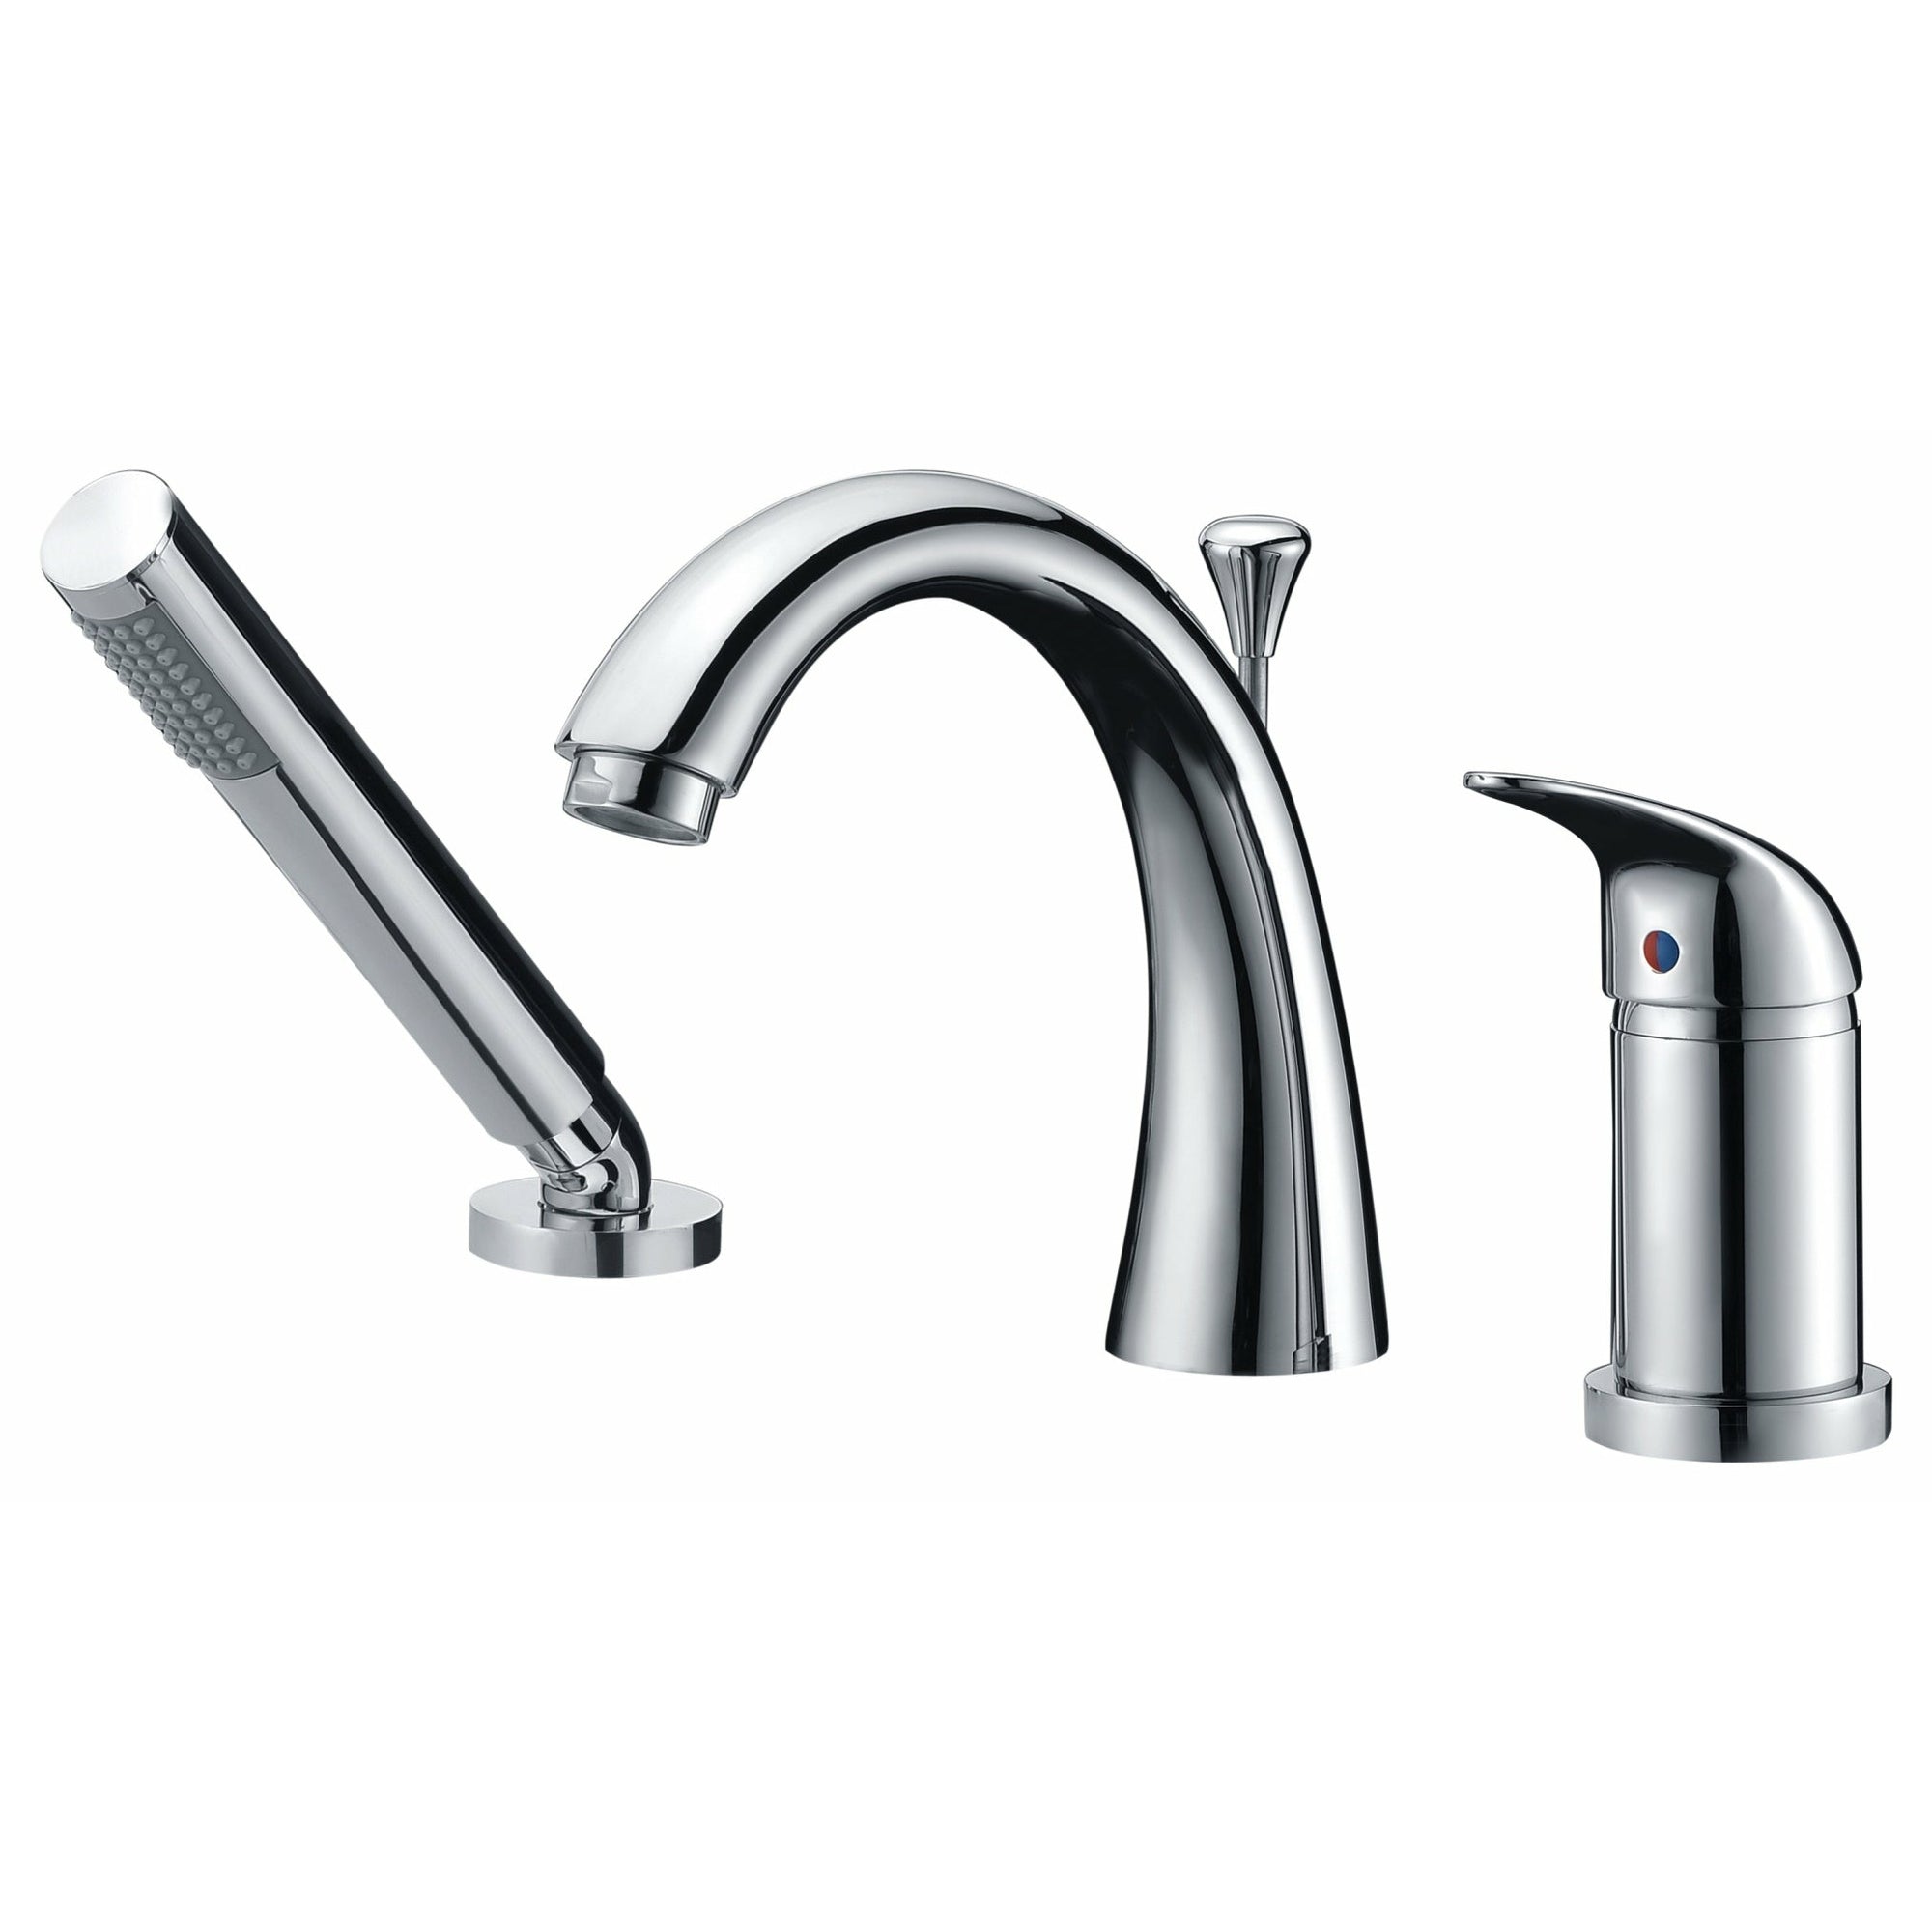 Anzzi Den Series Single Handle Deck-Mount Roman Tub Faucet with Handheld Sprayer in Polished Chrome - Solid Brass Valves - FR-AZ801 - Vital Hydrotherapy